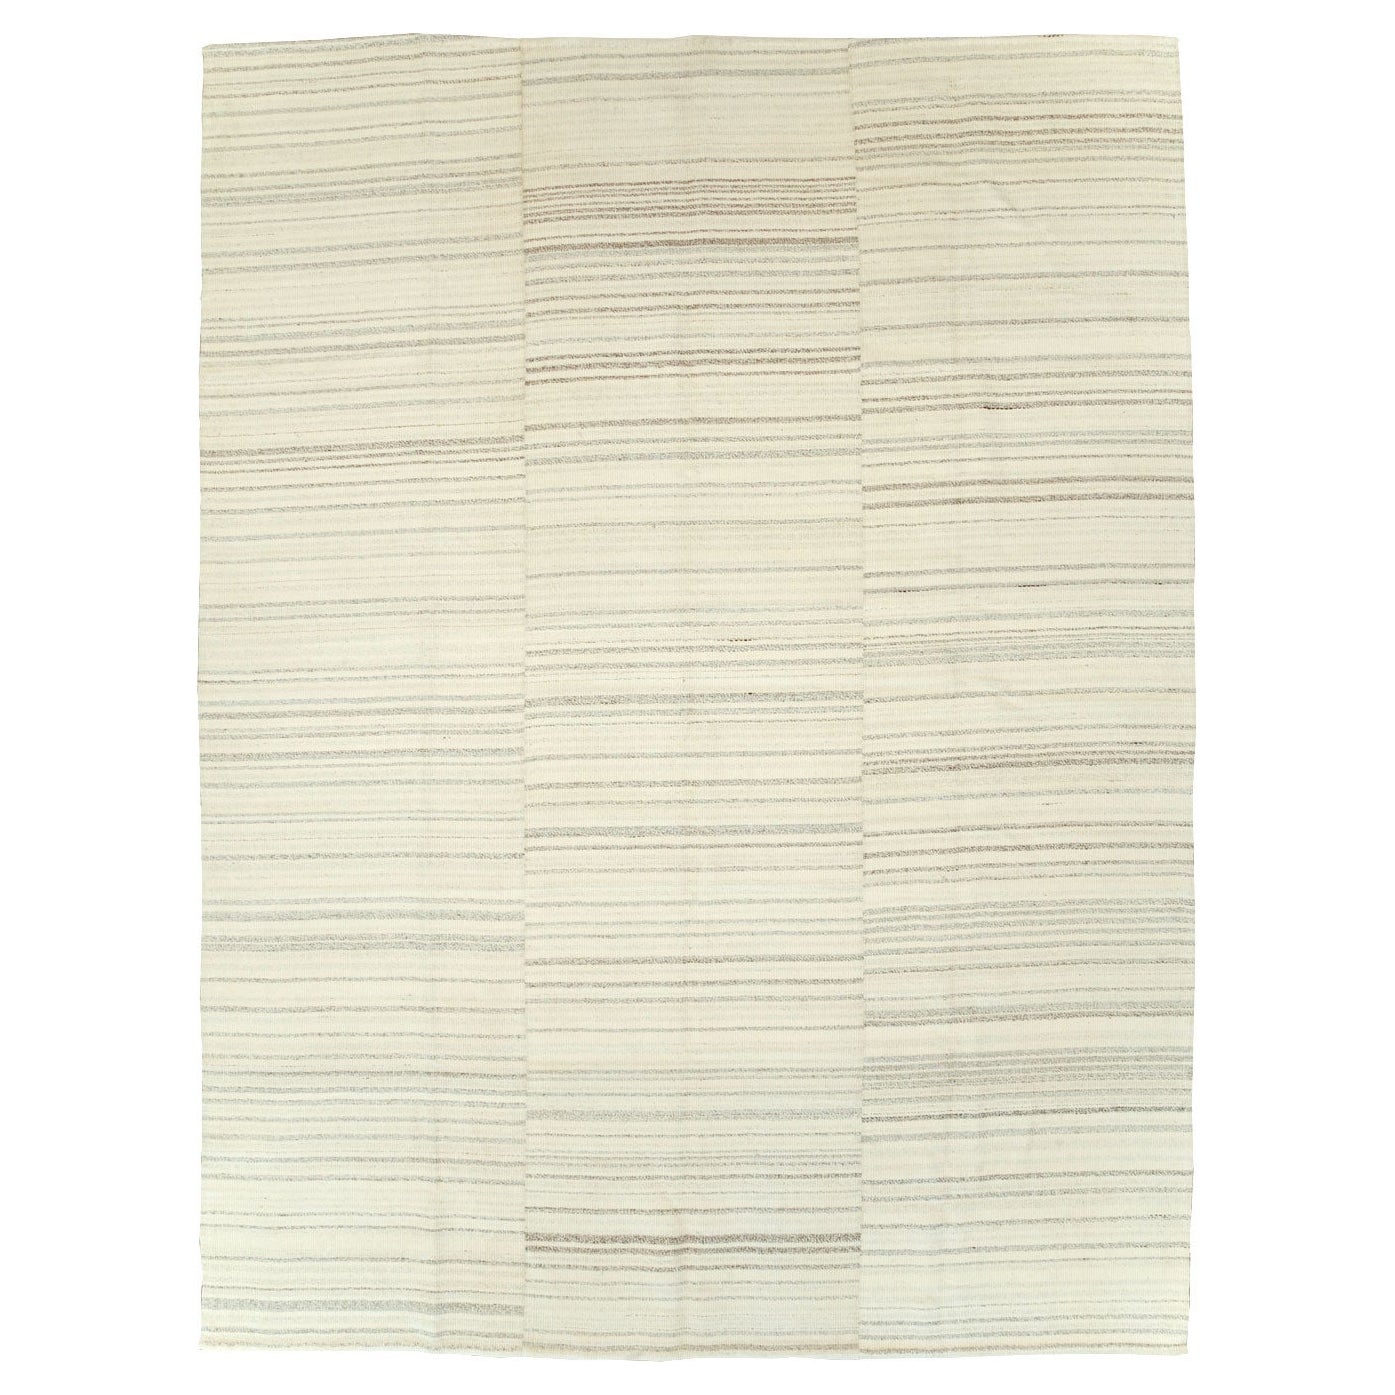 Contemporary Turkish Flatweave Kilim Room Size Carpet in Beige For Sale